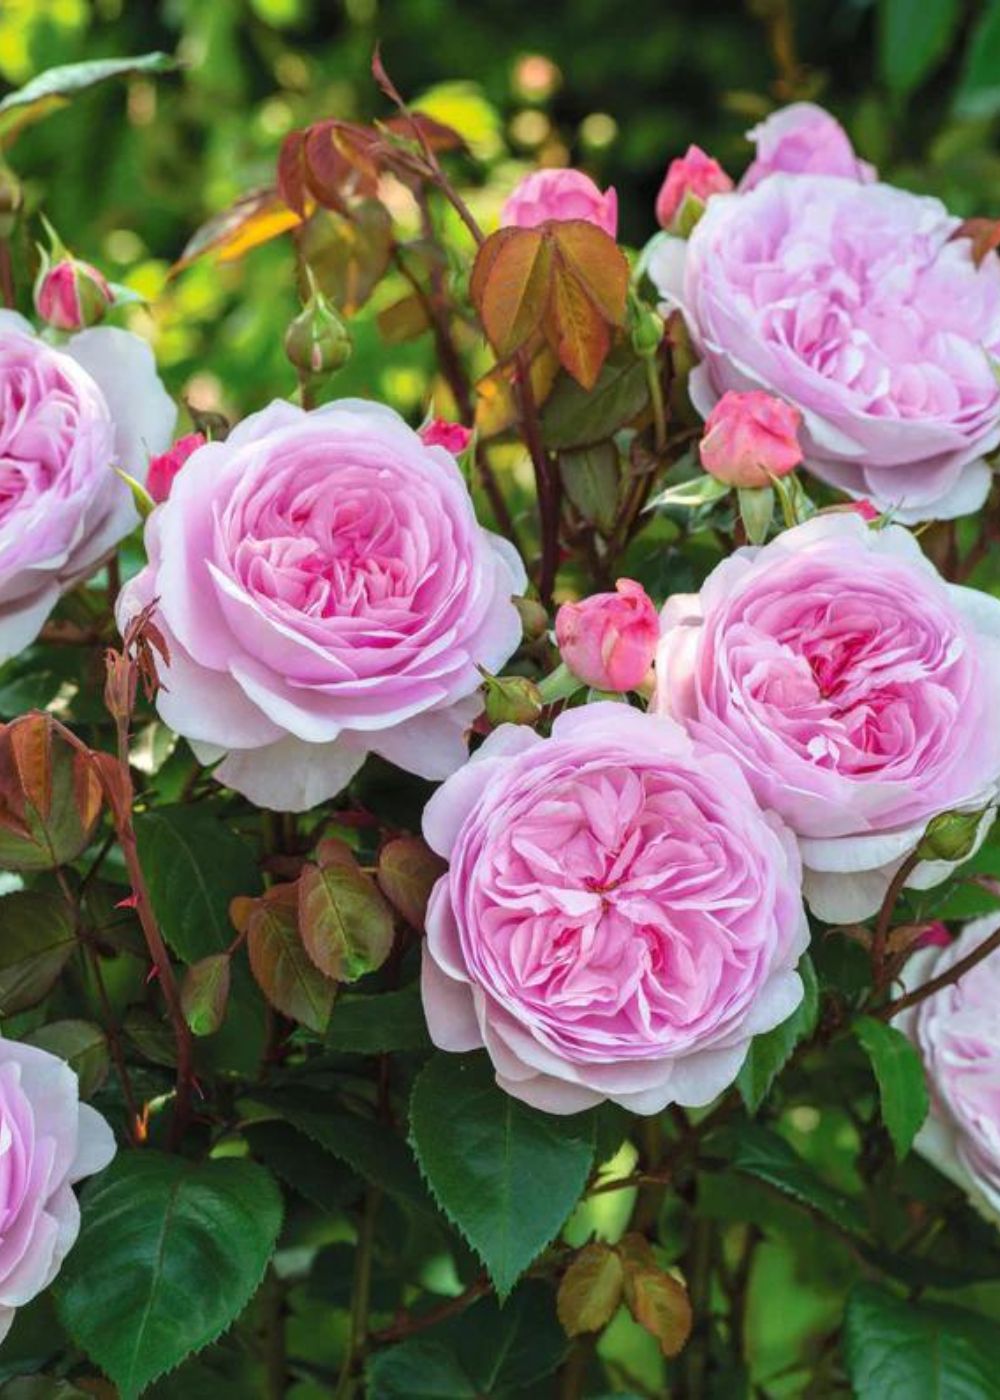 Bare Root Roses For Shady Garden Greats - Add Vibrancy to Your